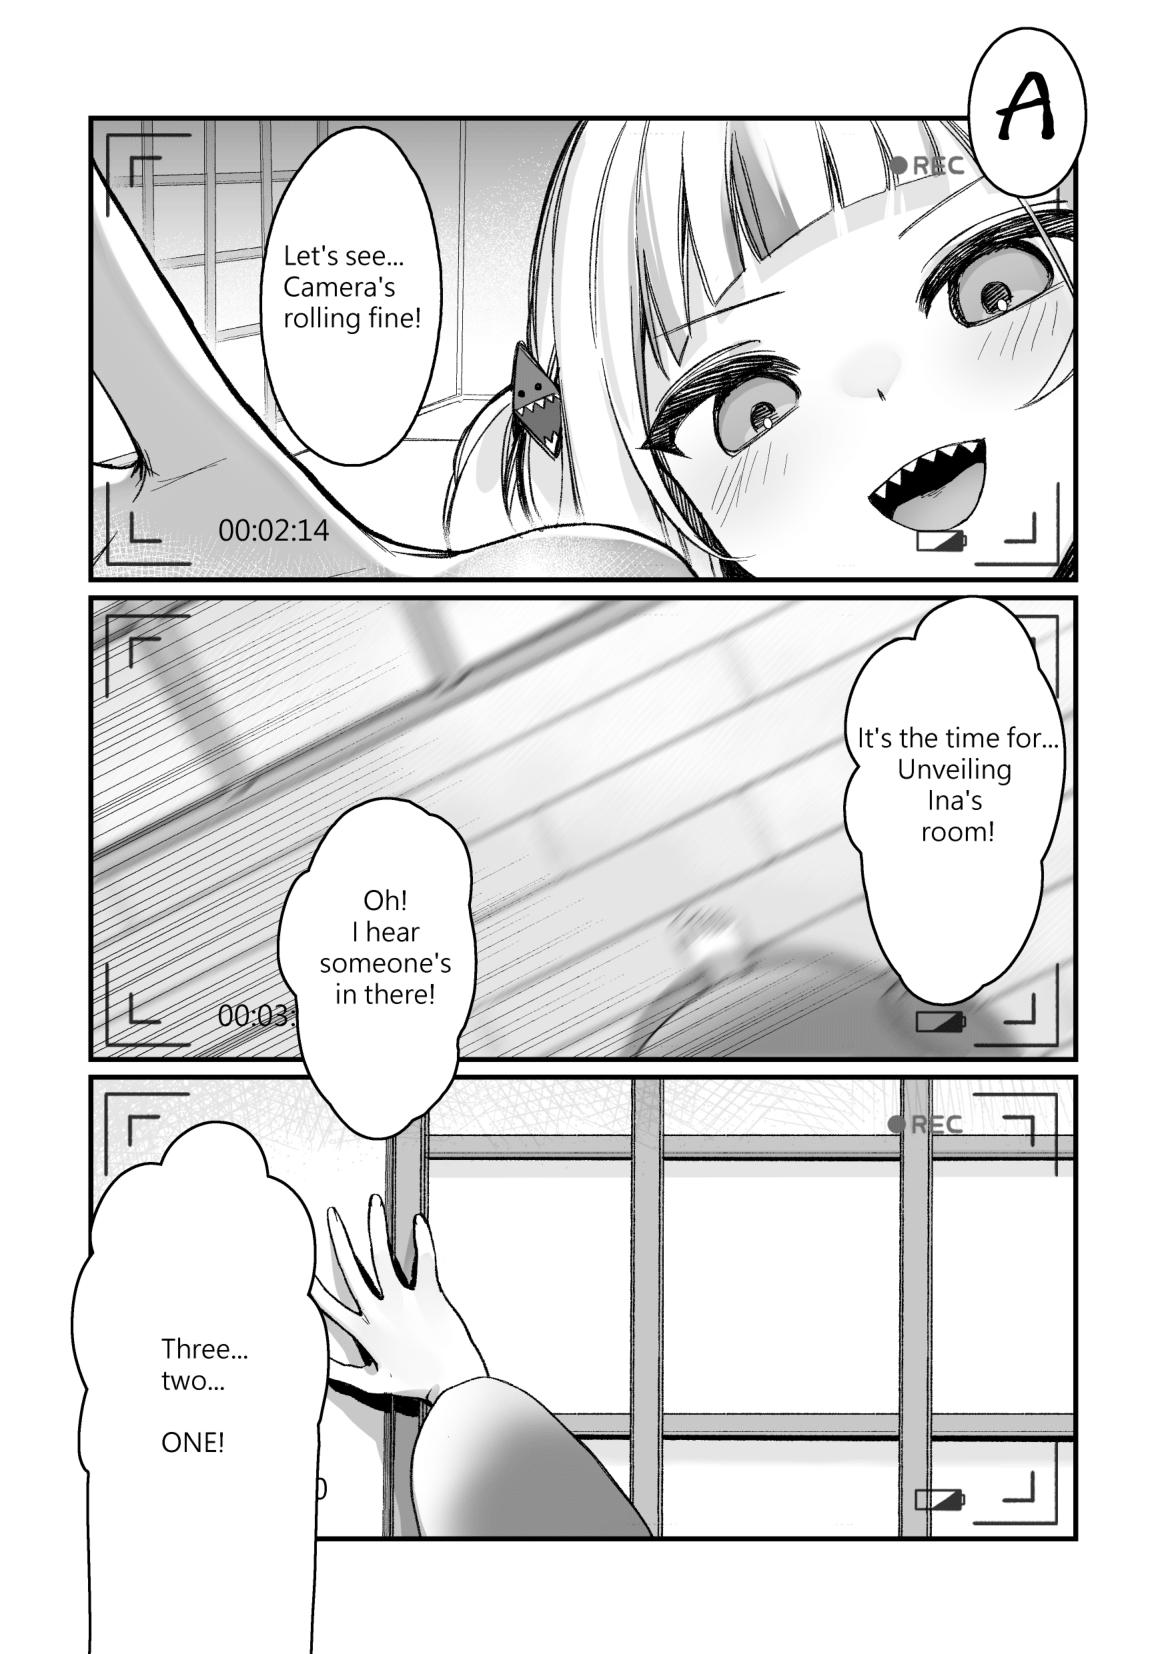 Class Room 【R-18 Comic】Tentacle!! Ina's Boing Boing is out of control!! - Hololive Speculum - Page 3